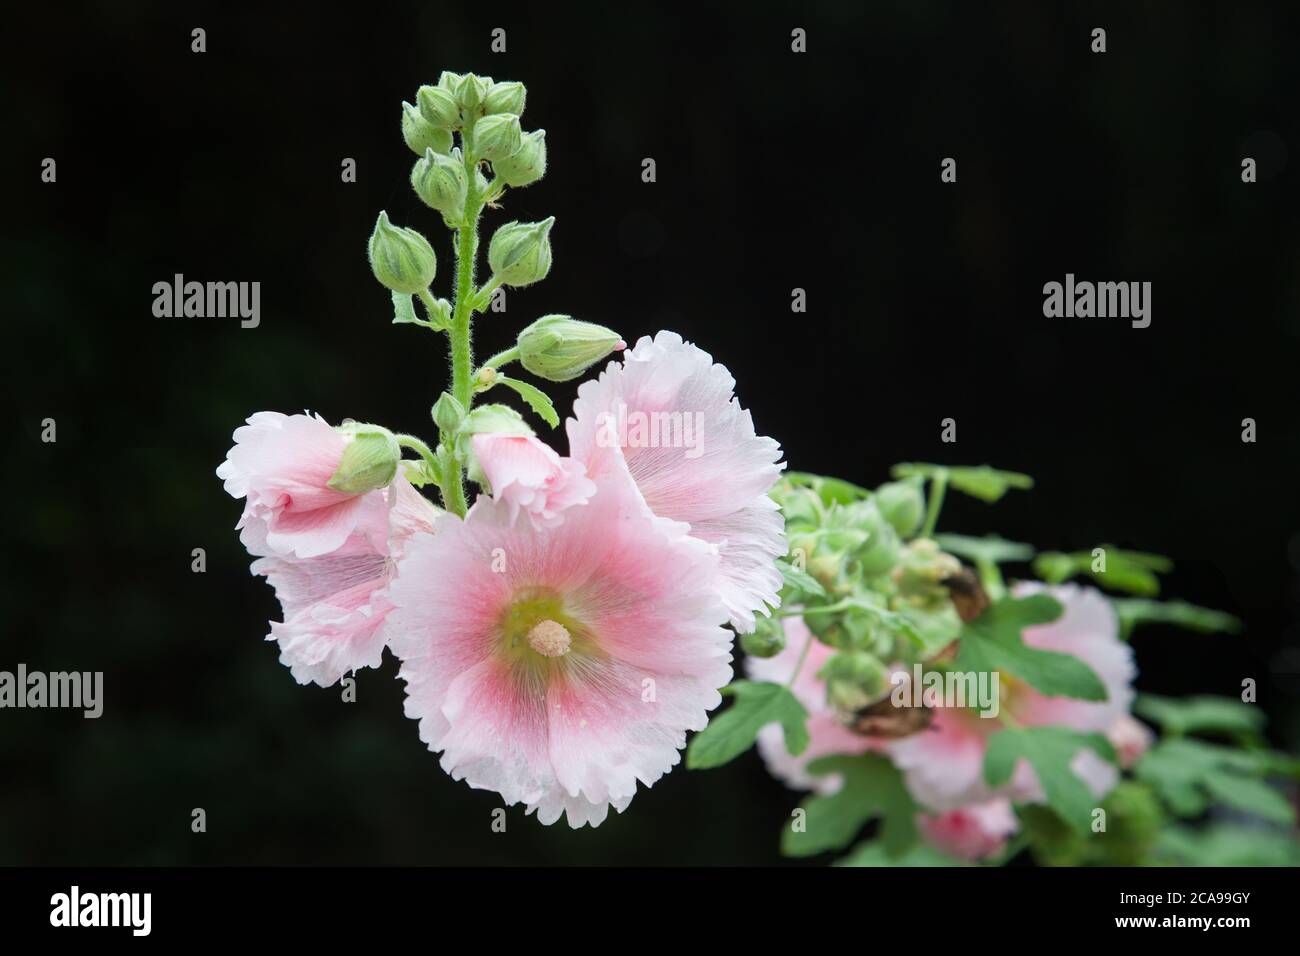 The flowers of hollyhock isolated on the black background in a garden Stock Photo